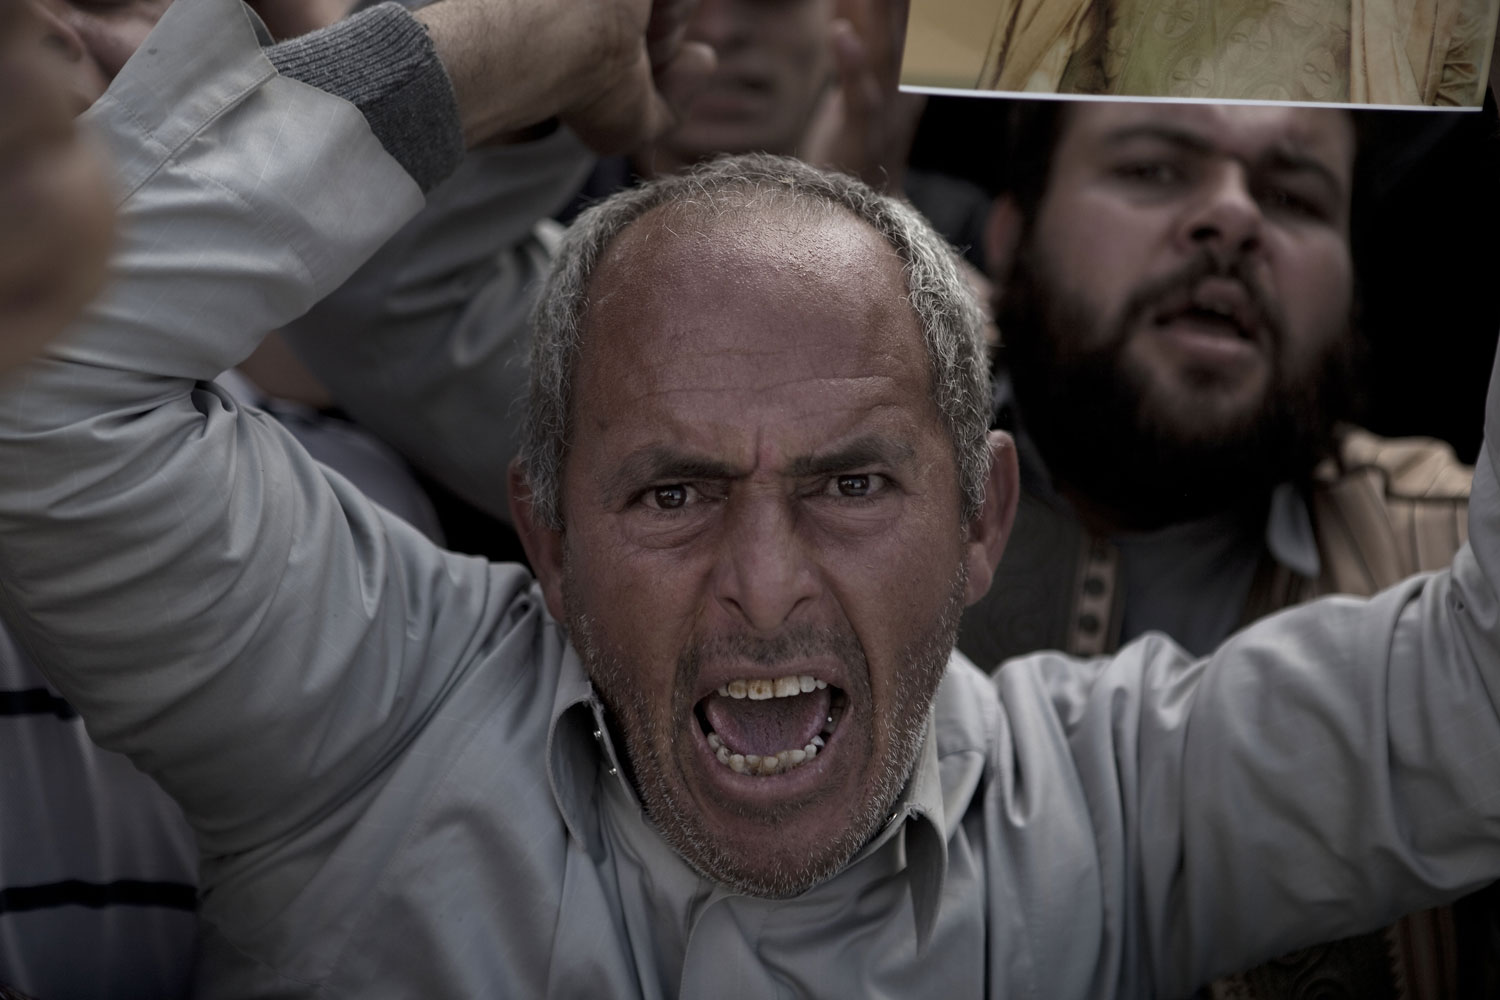 Supporters of Gaddafi vent their anger towards the foreign media in Ban-Waled, March 23, 2011.